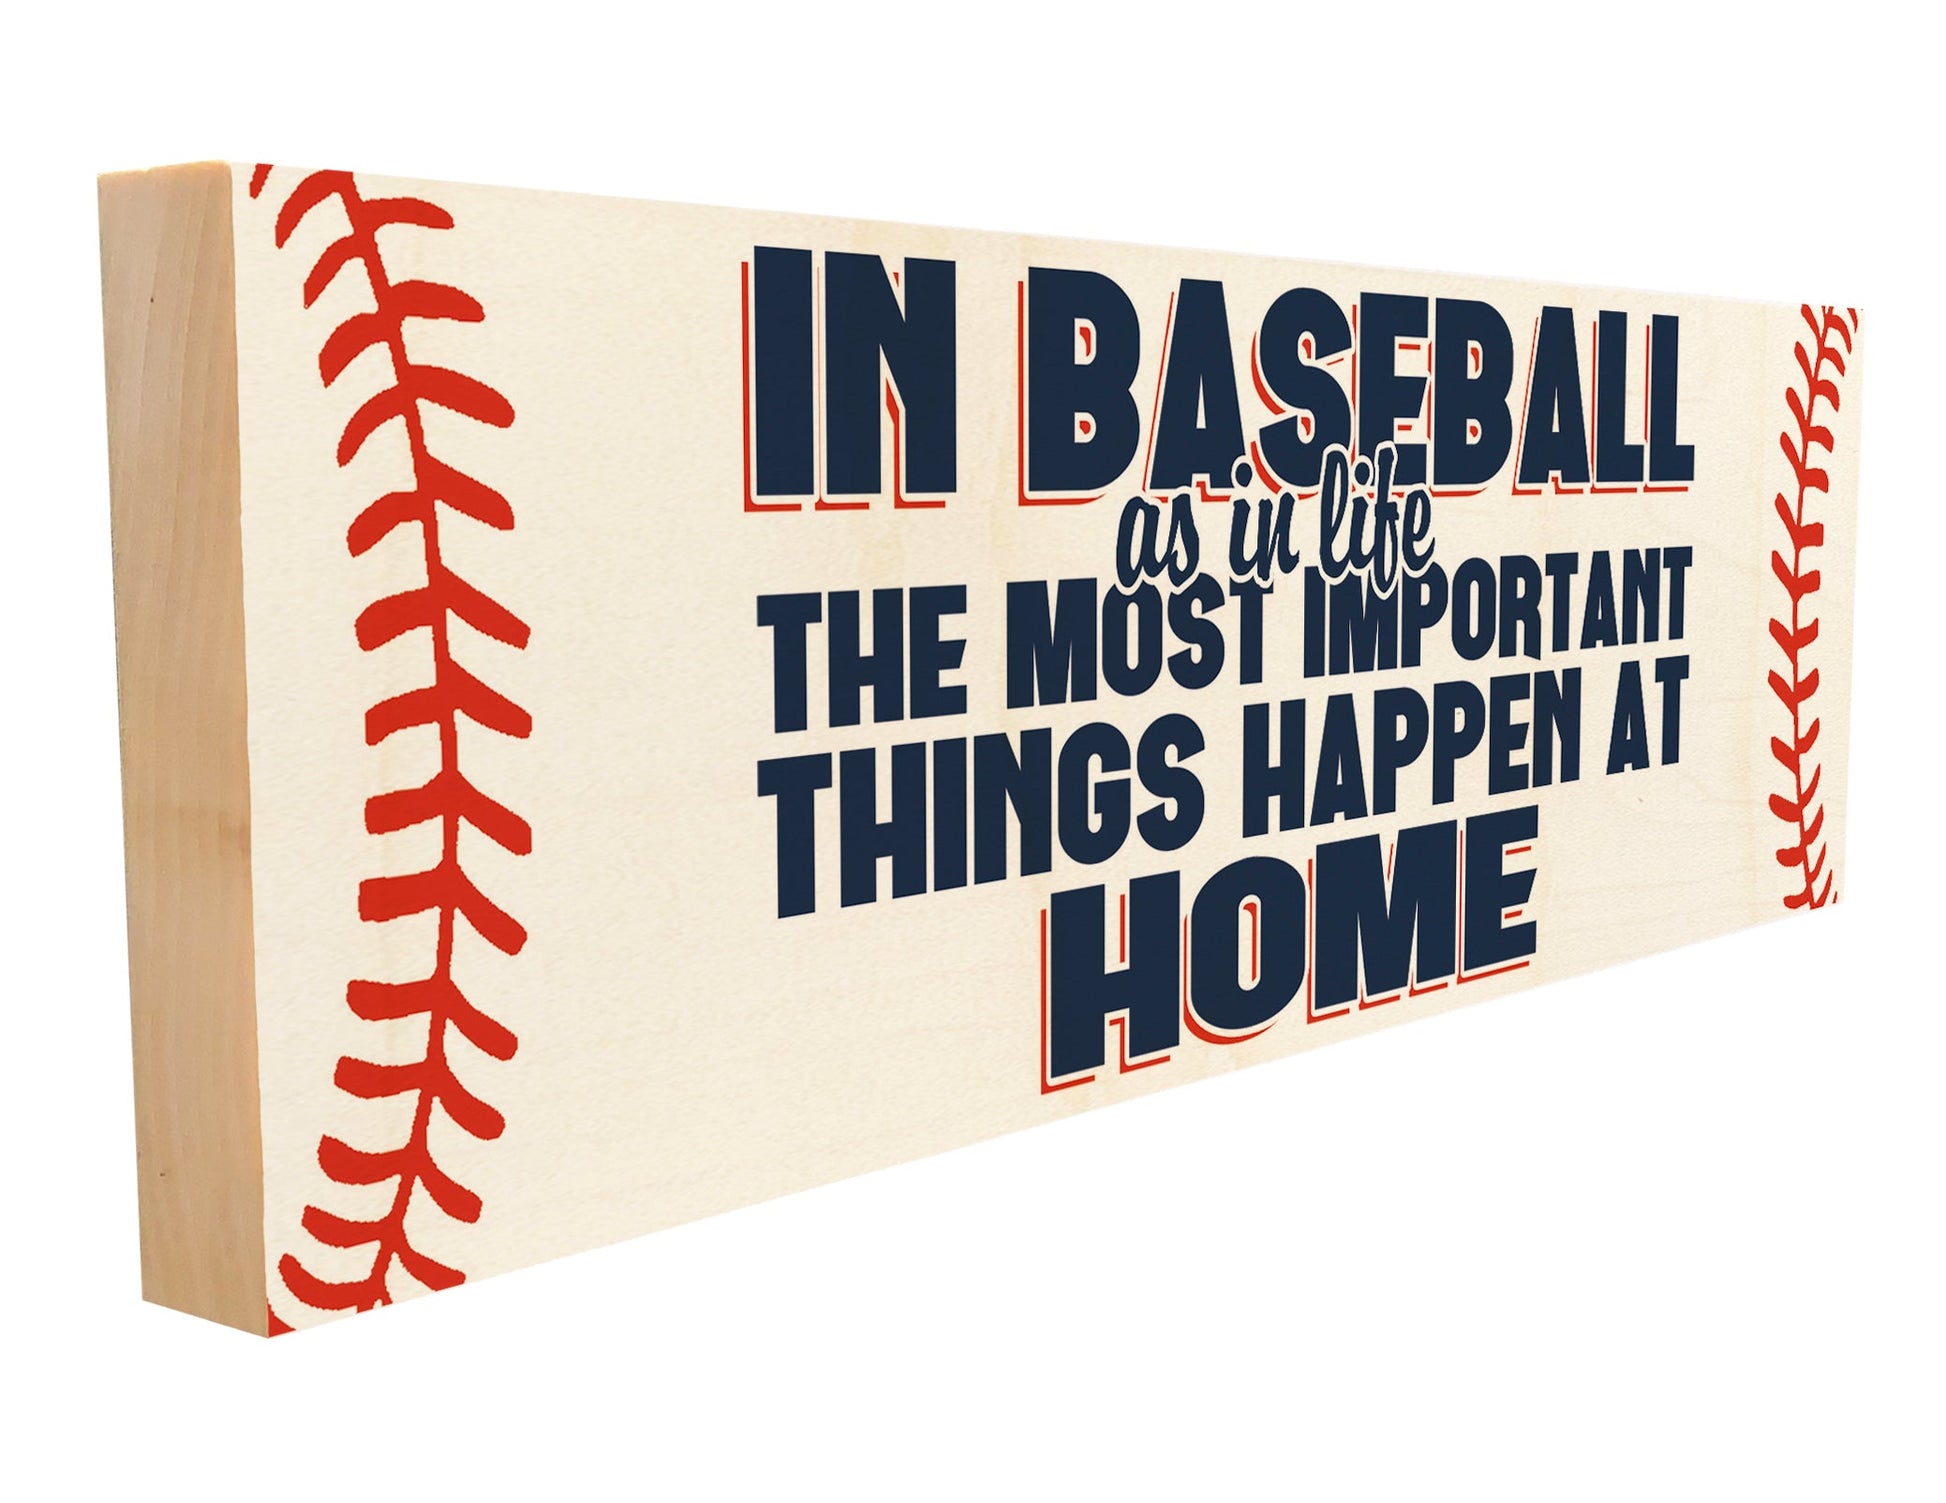 Baseball. The Most Important Things Happen at Home.